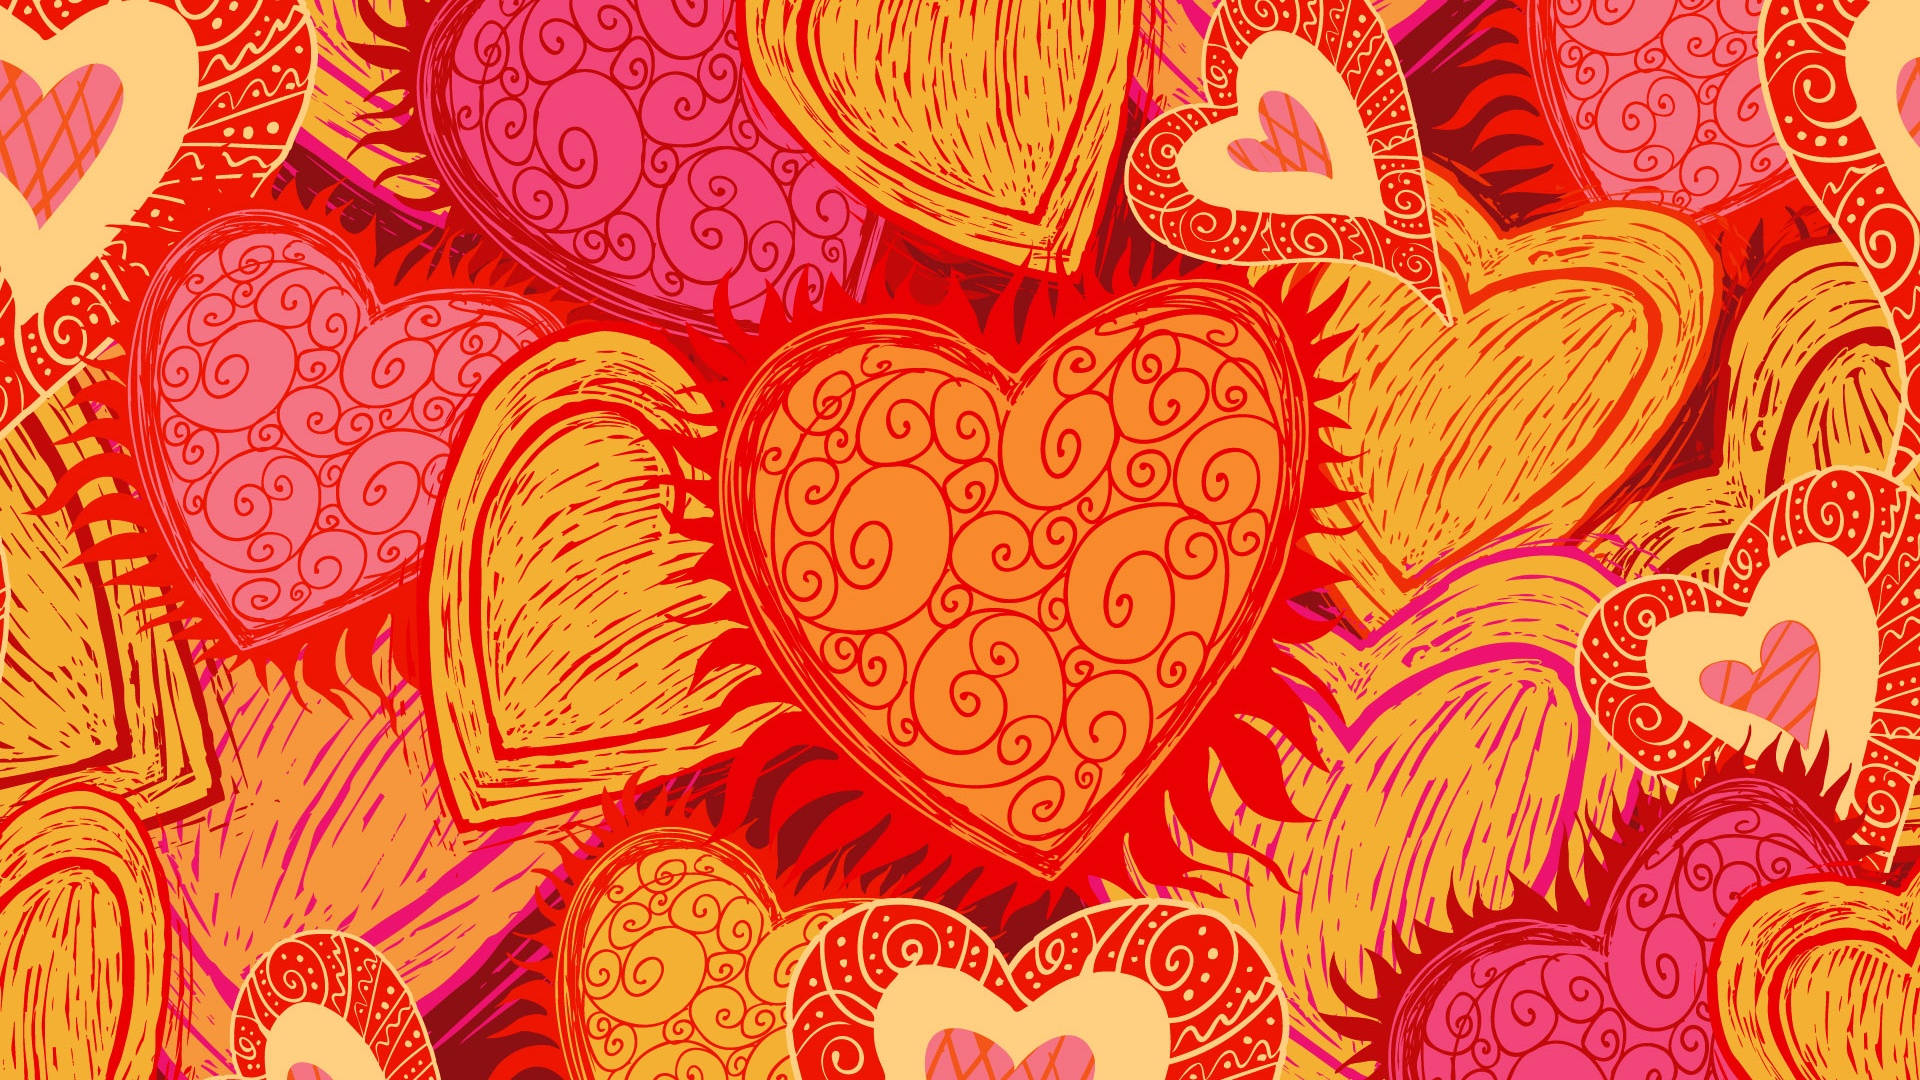 Celebrate Valentines Day with love and creativity Wallpaper